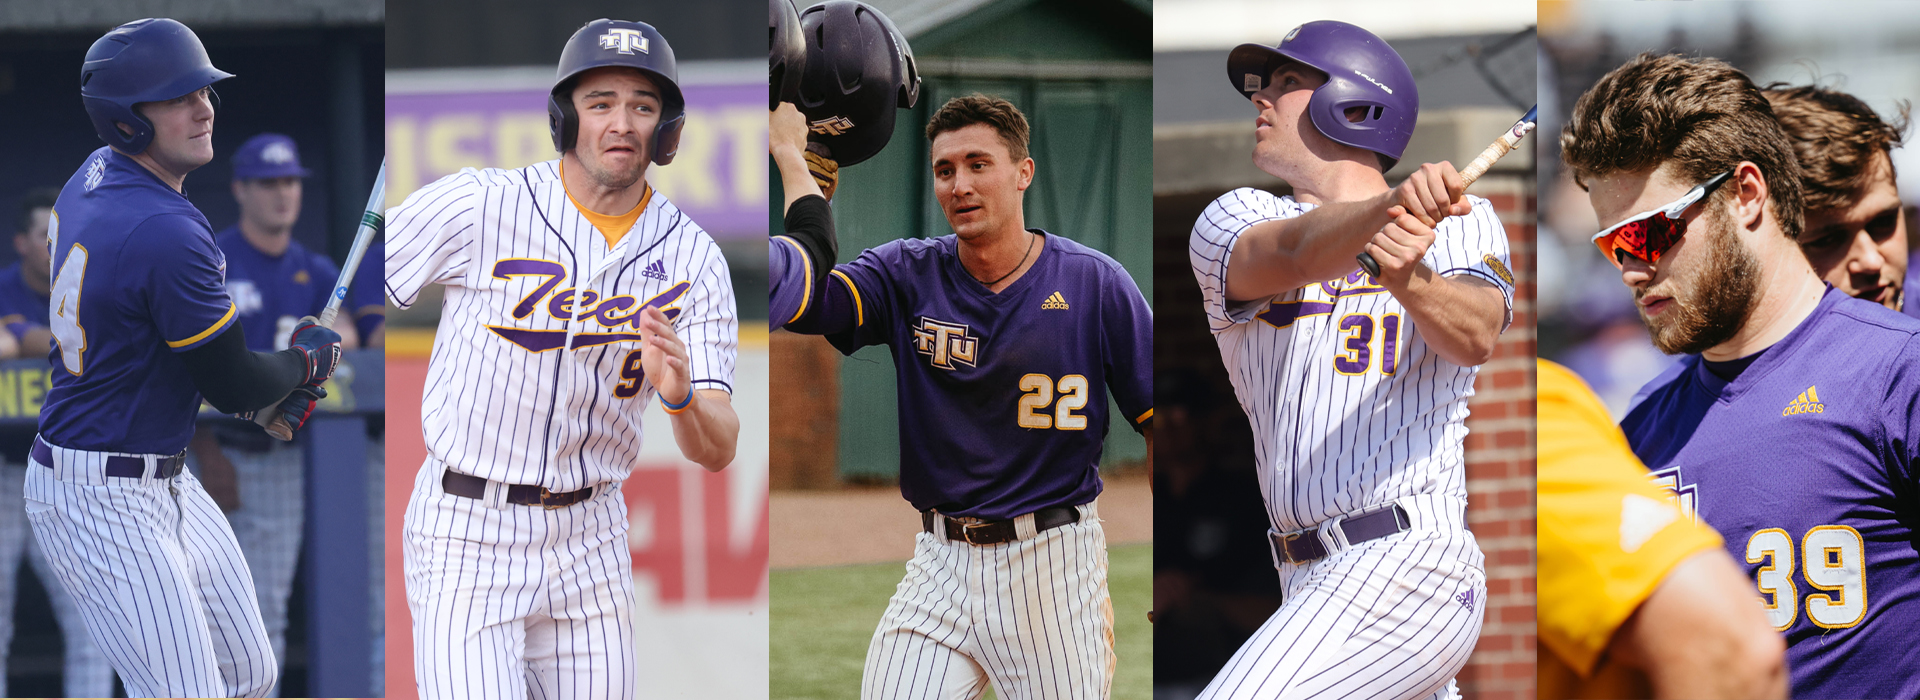 Five Golden Eagles collect OVC postseason honors